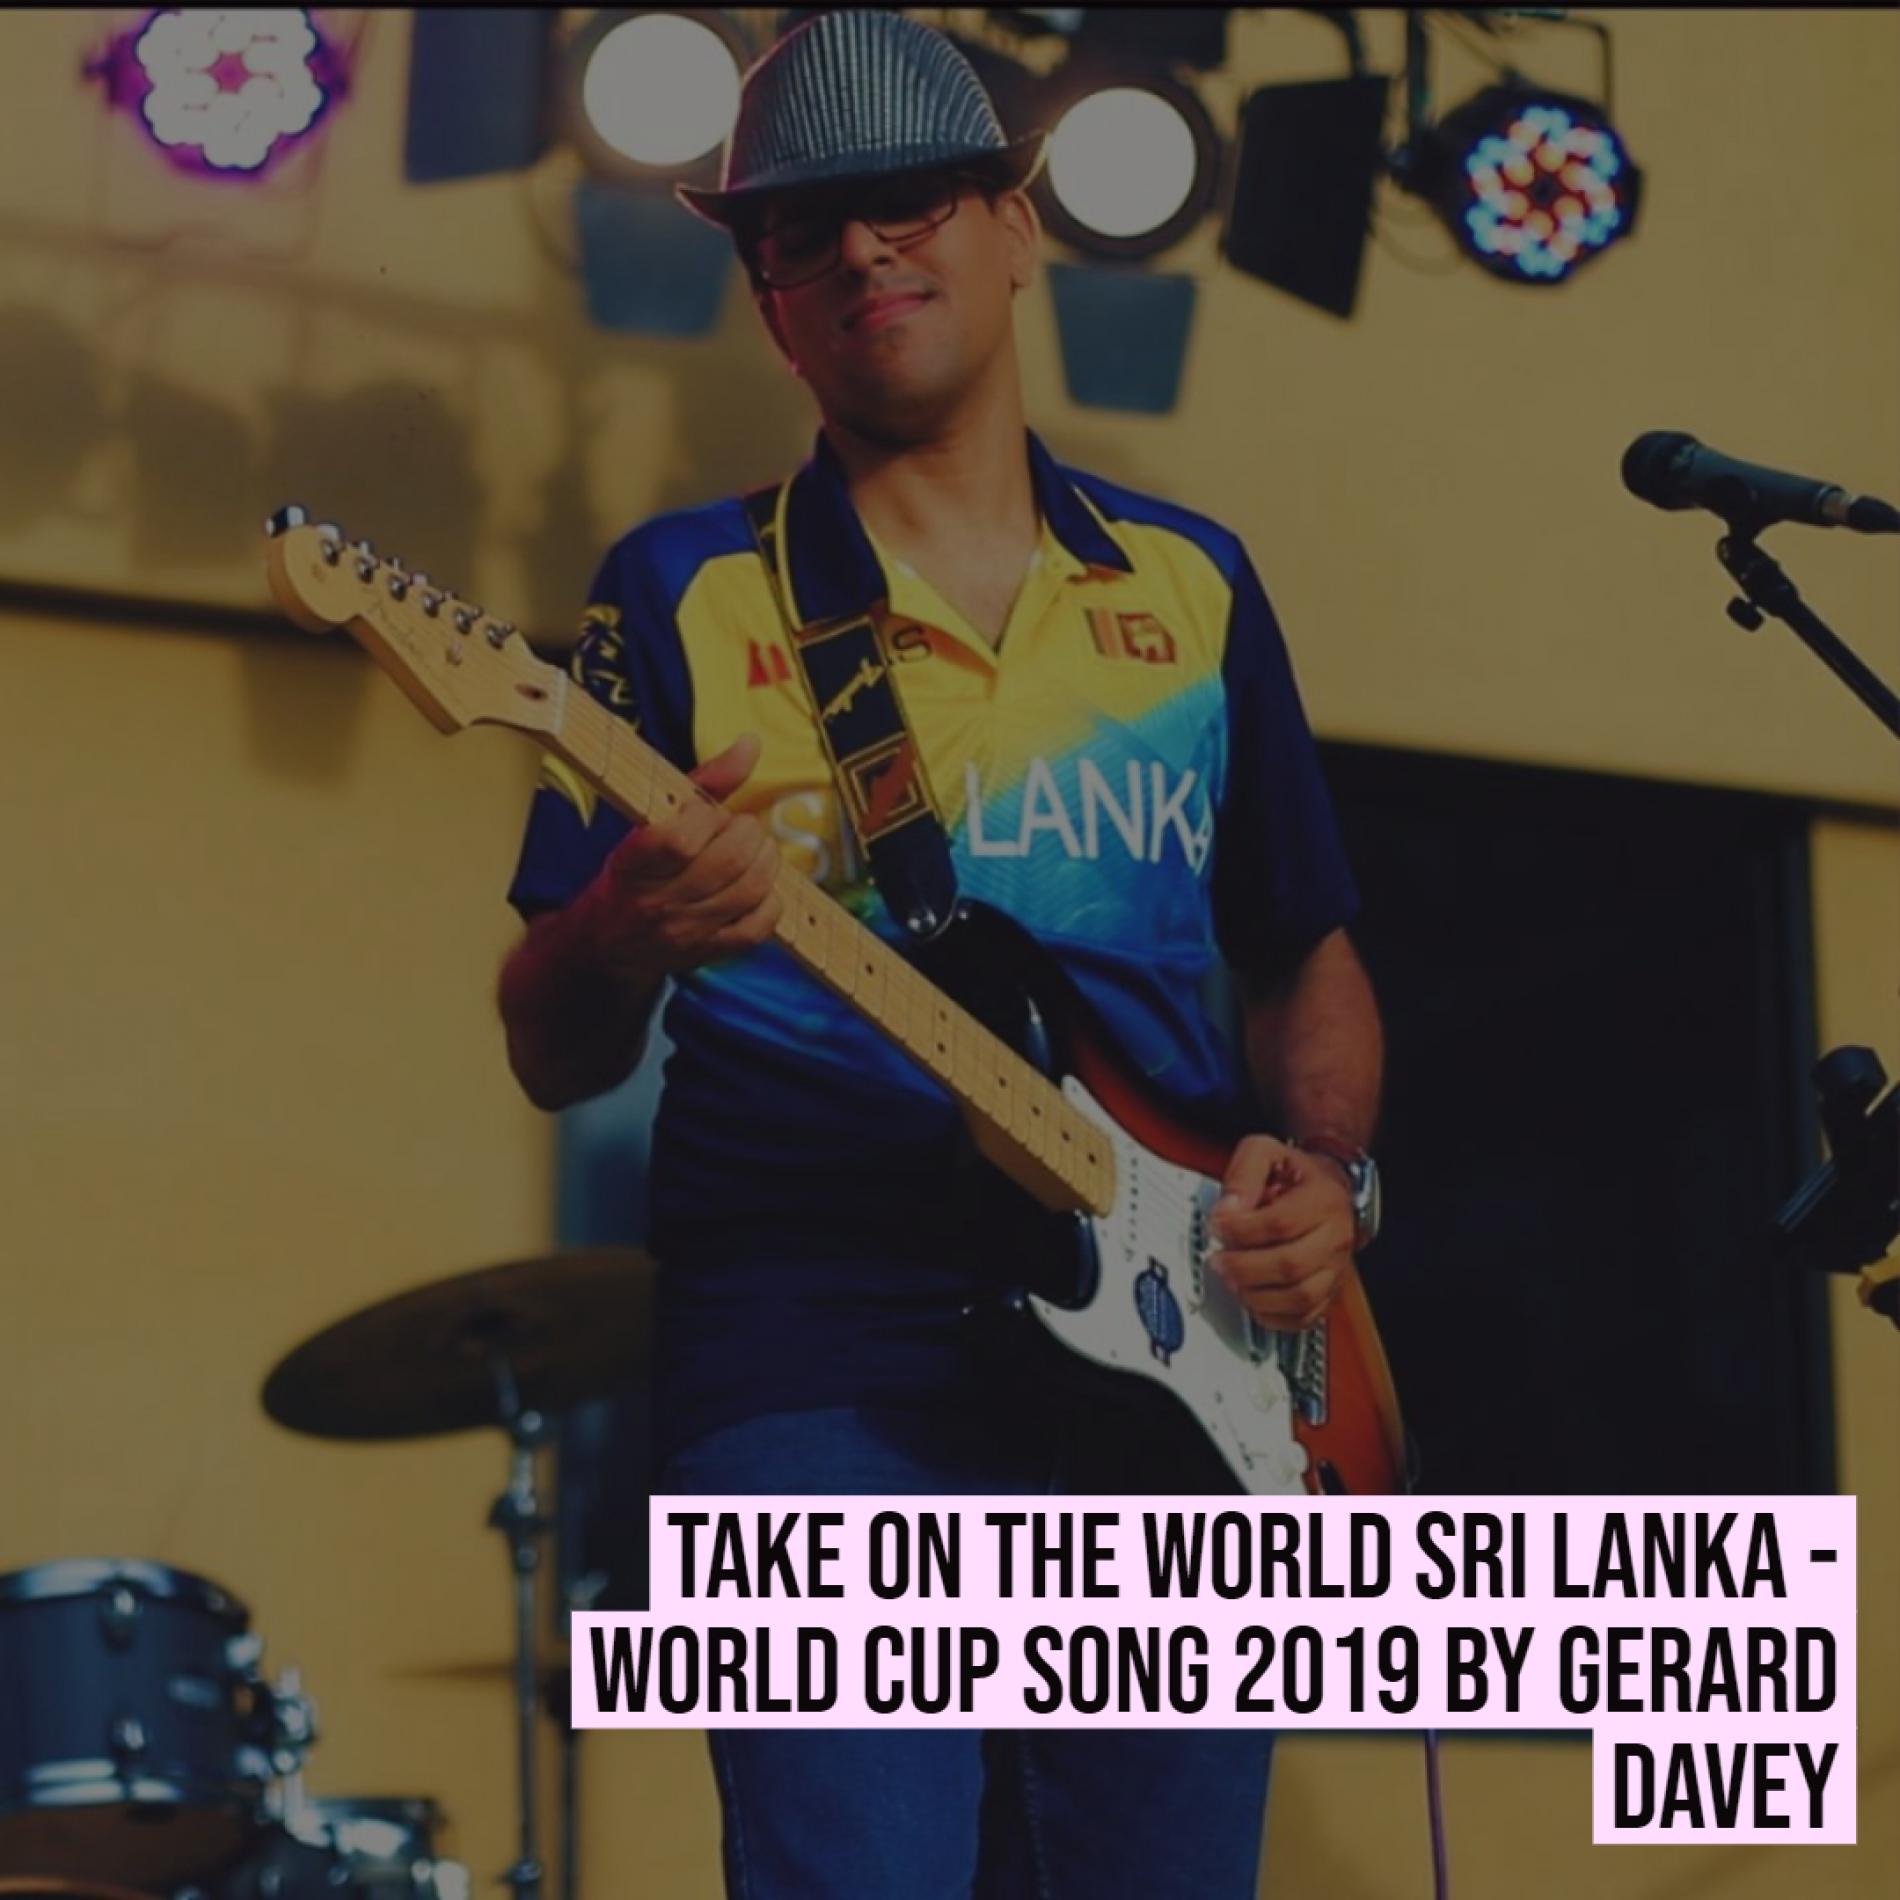 Take On The World Sri Lanka – World Cup Song 2019 By Gerard Davey